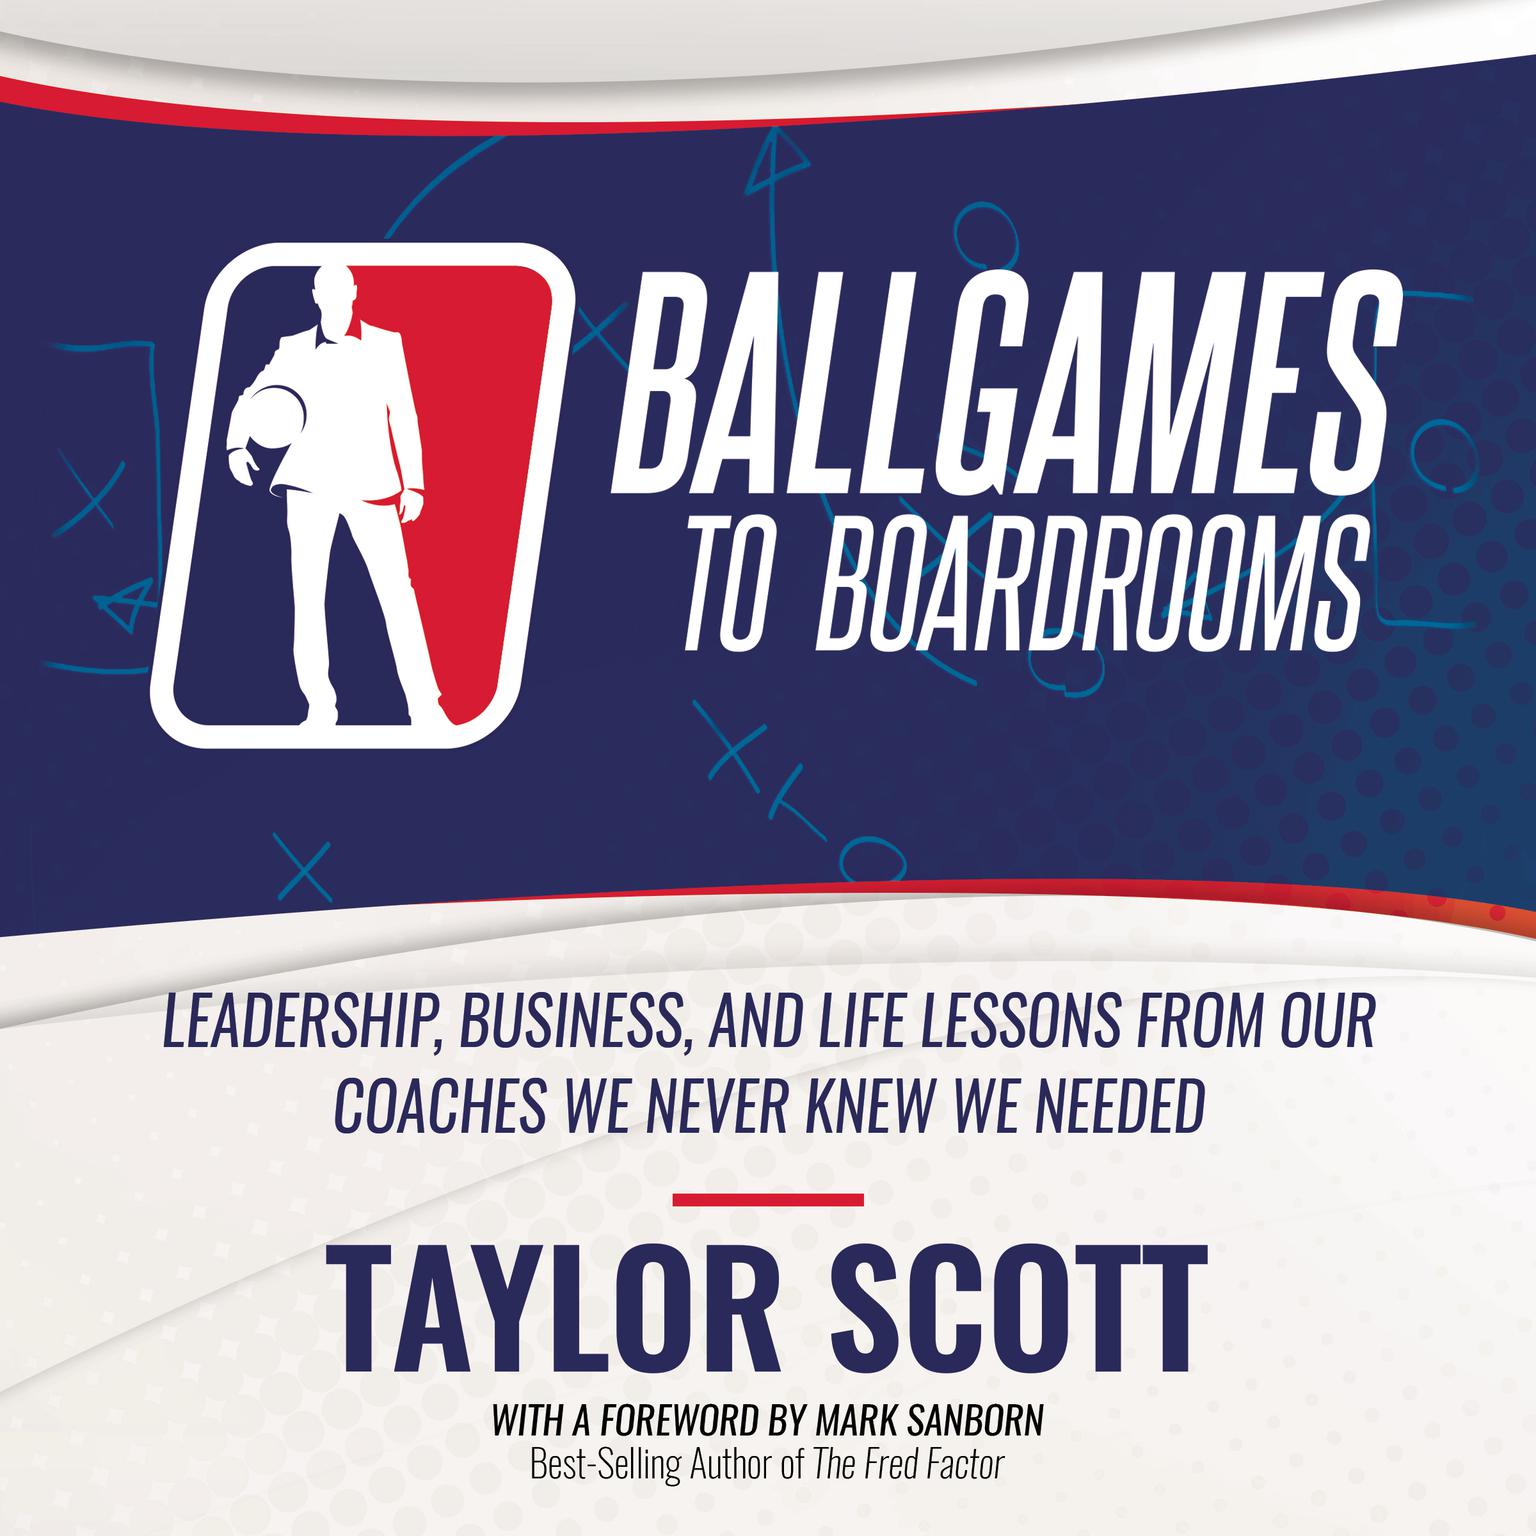 Ballgames to Boardrooms: Leadership, Business, and Life Lessons From Our Coaches We Never Knew We Needed Audiobook, by Taylor Scott